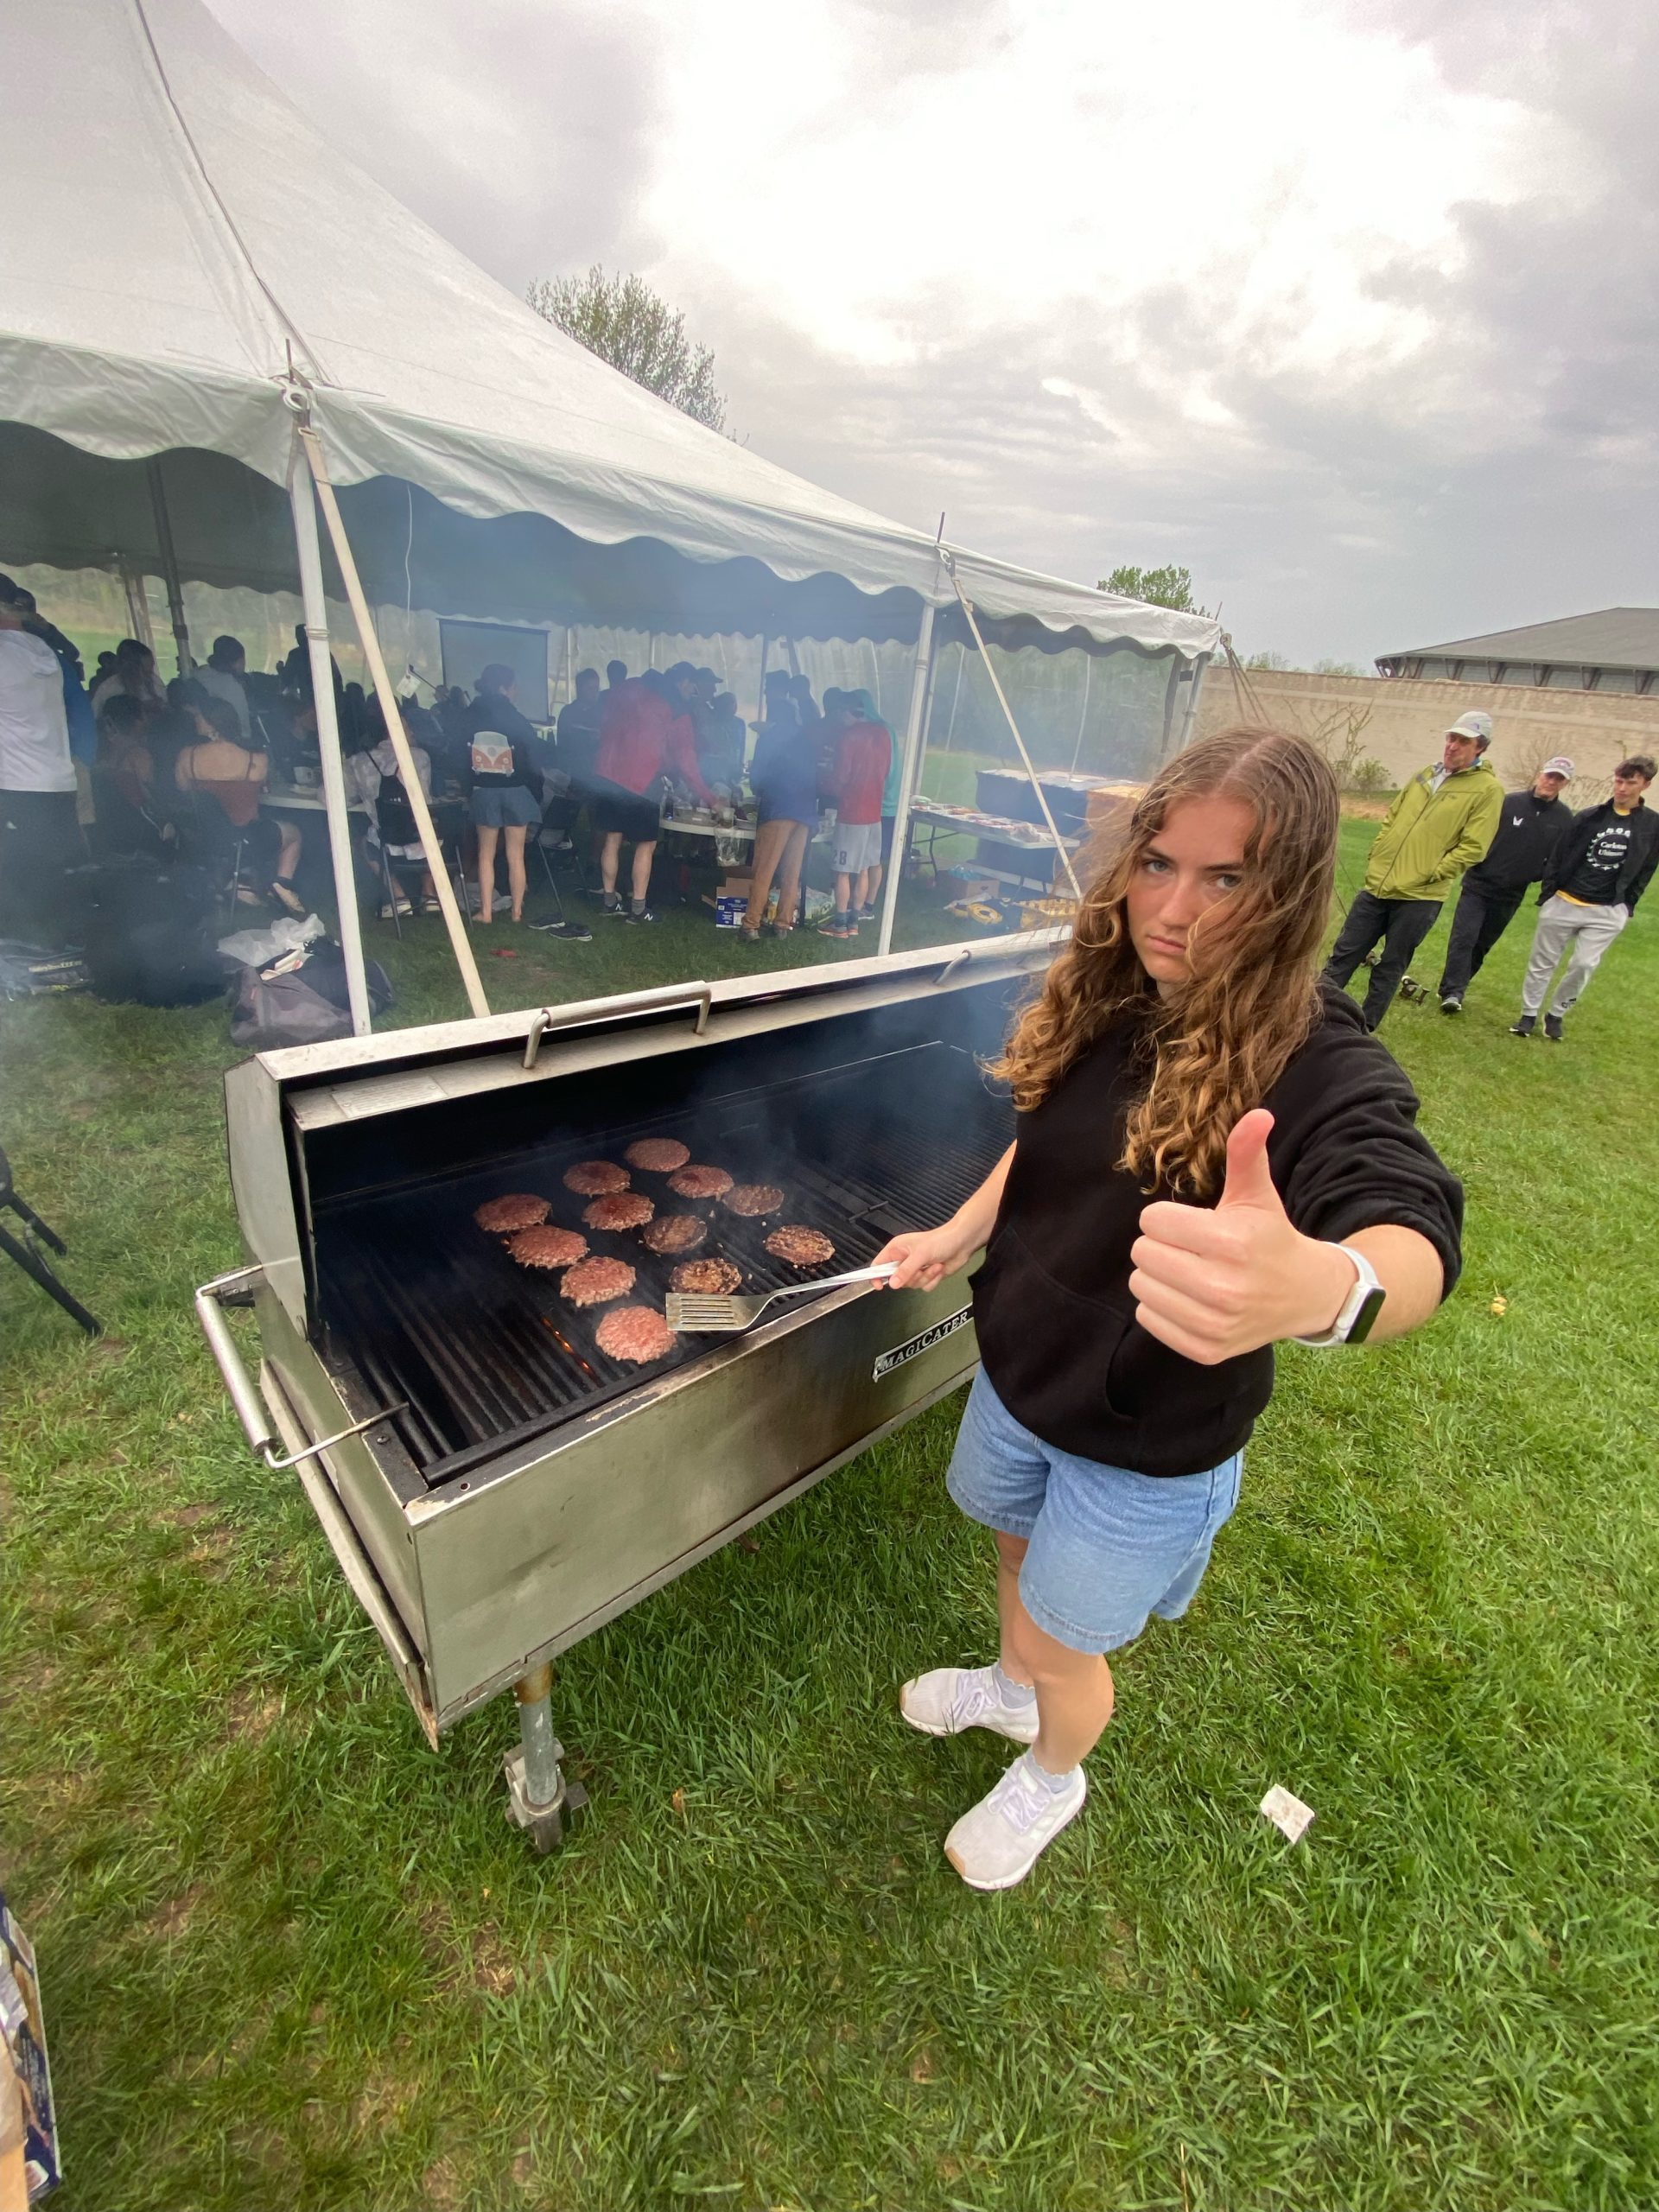 Person standing by a grill holding spatula and giving a thumbs up